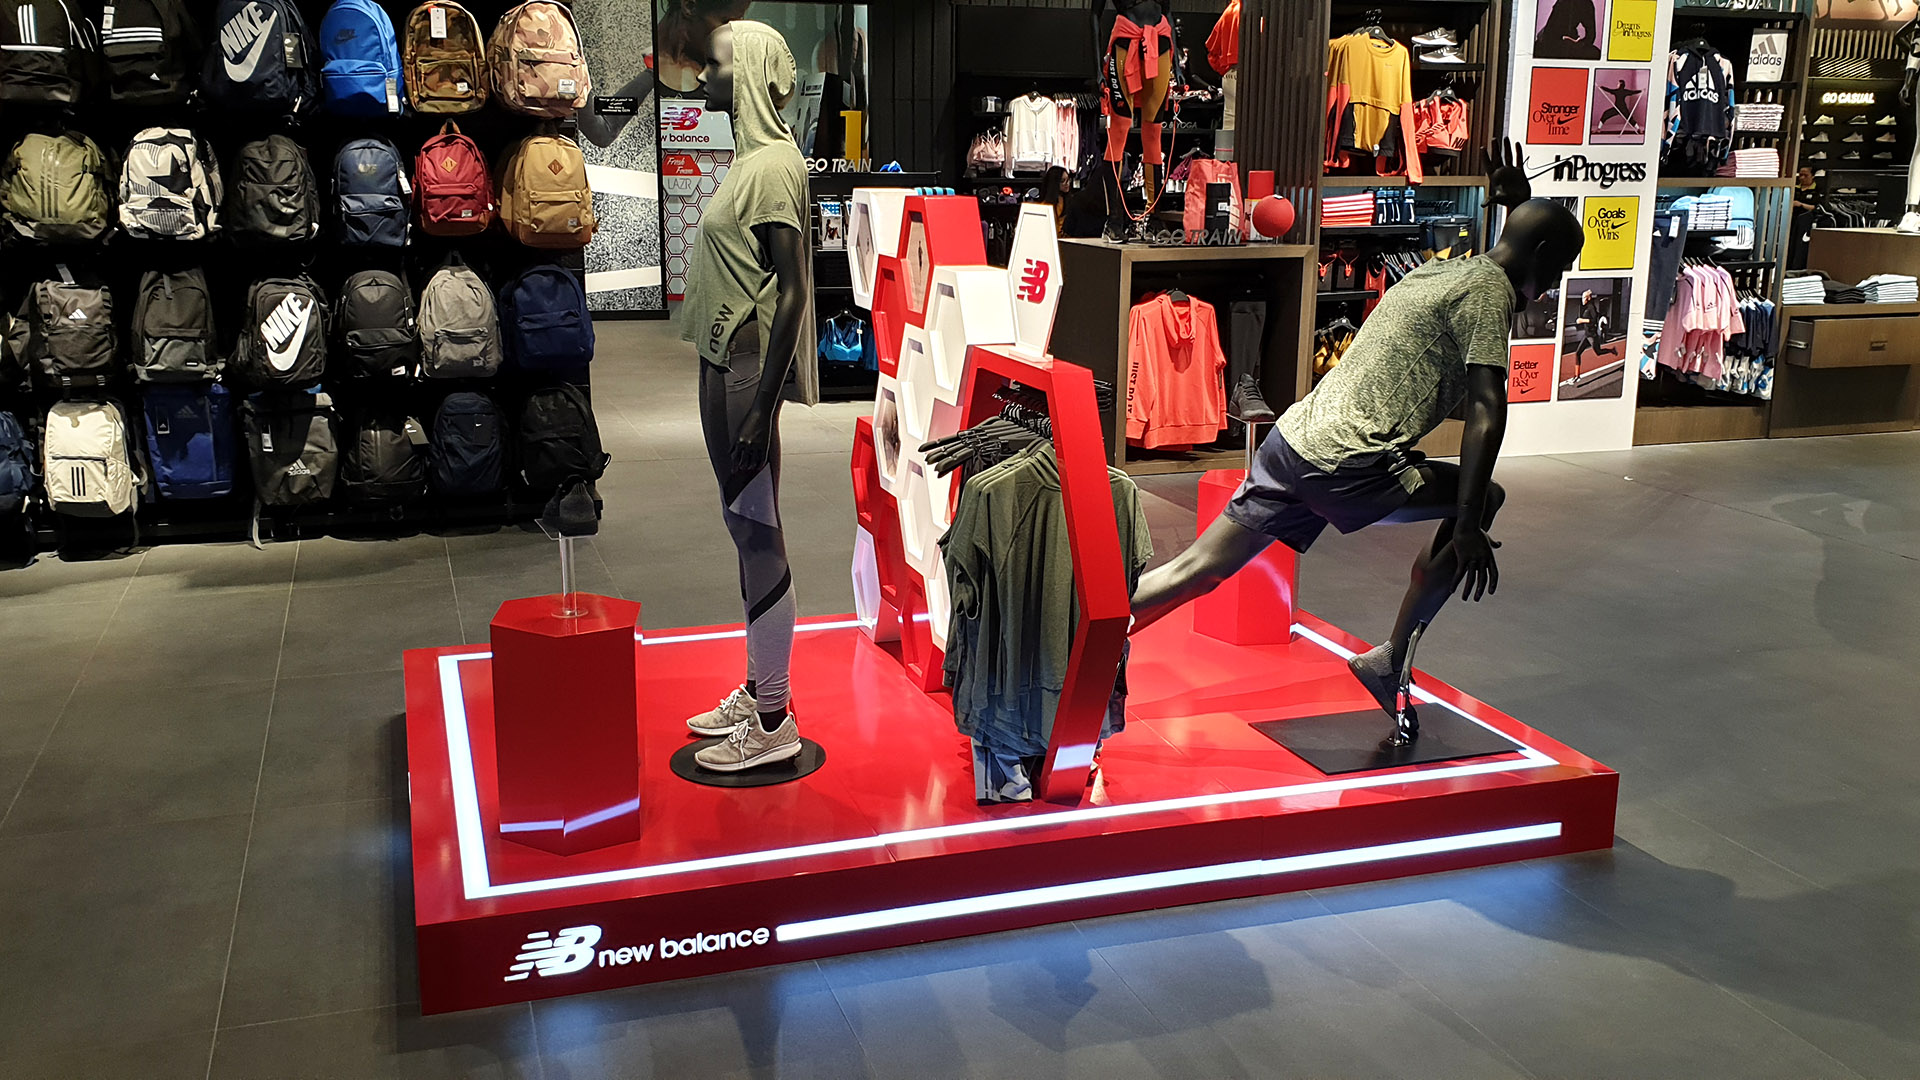 New Balance retail display stand fabricated and installed by ME Visual at Go Sport stores across Qatar.